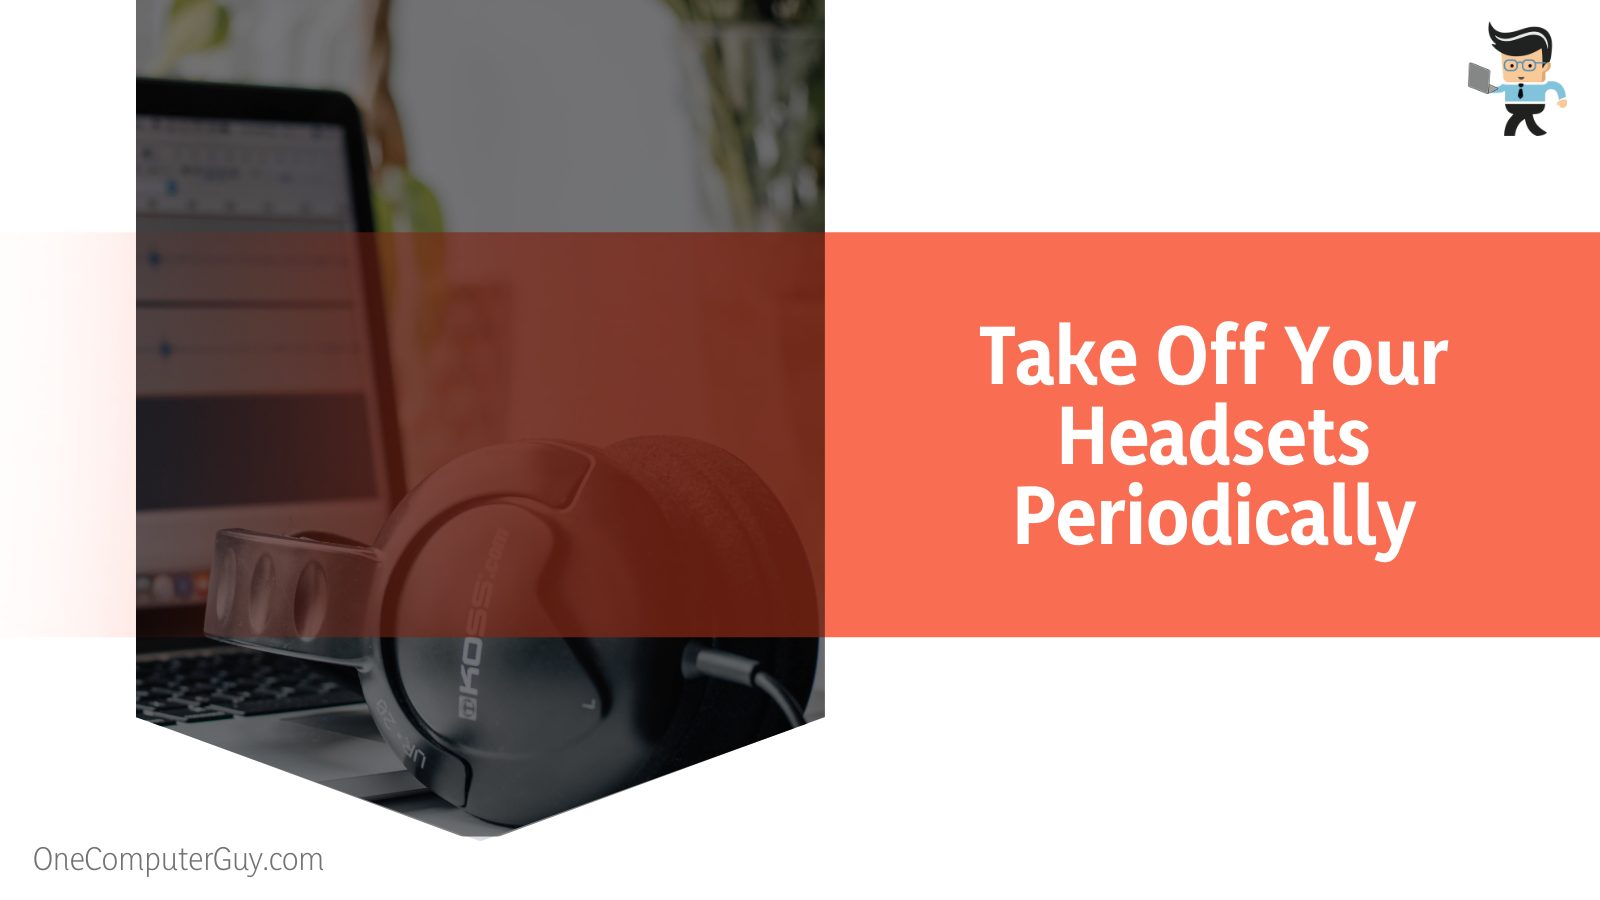 Take Off Your Headsets Periodically